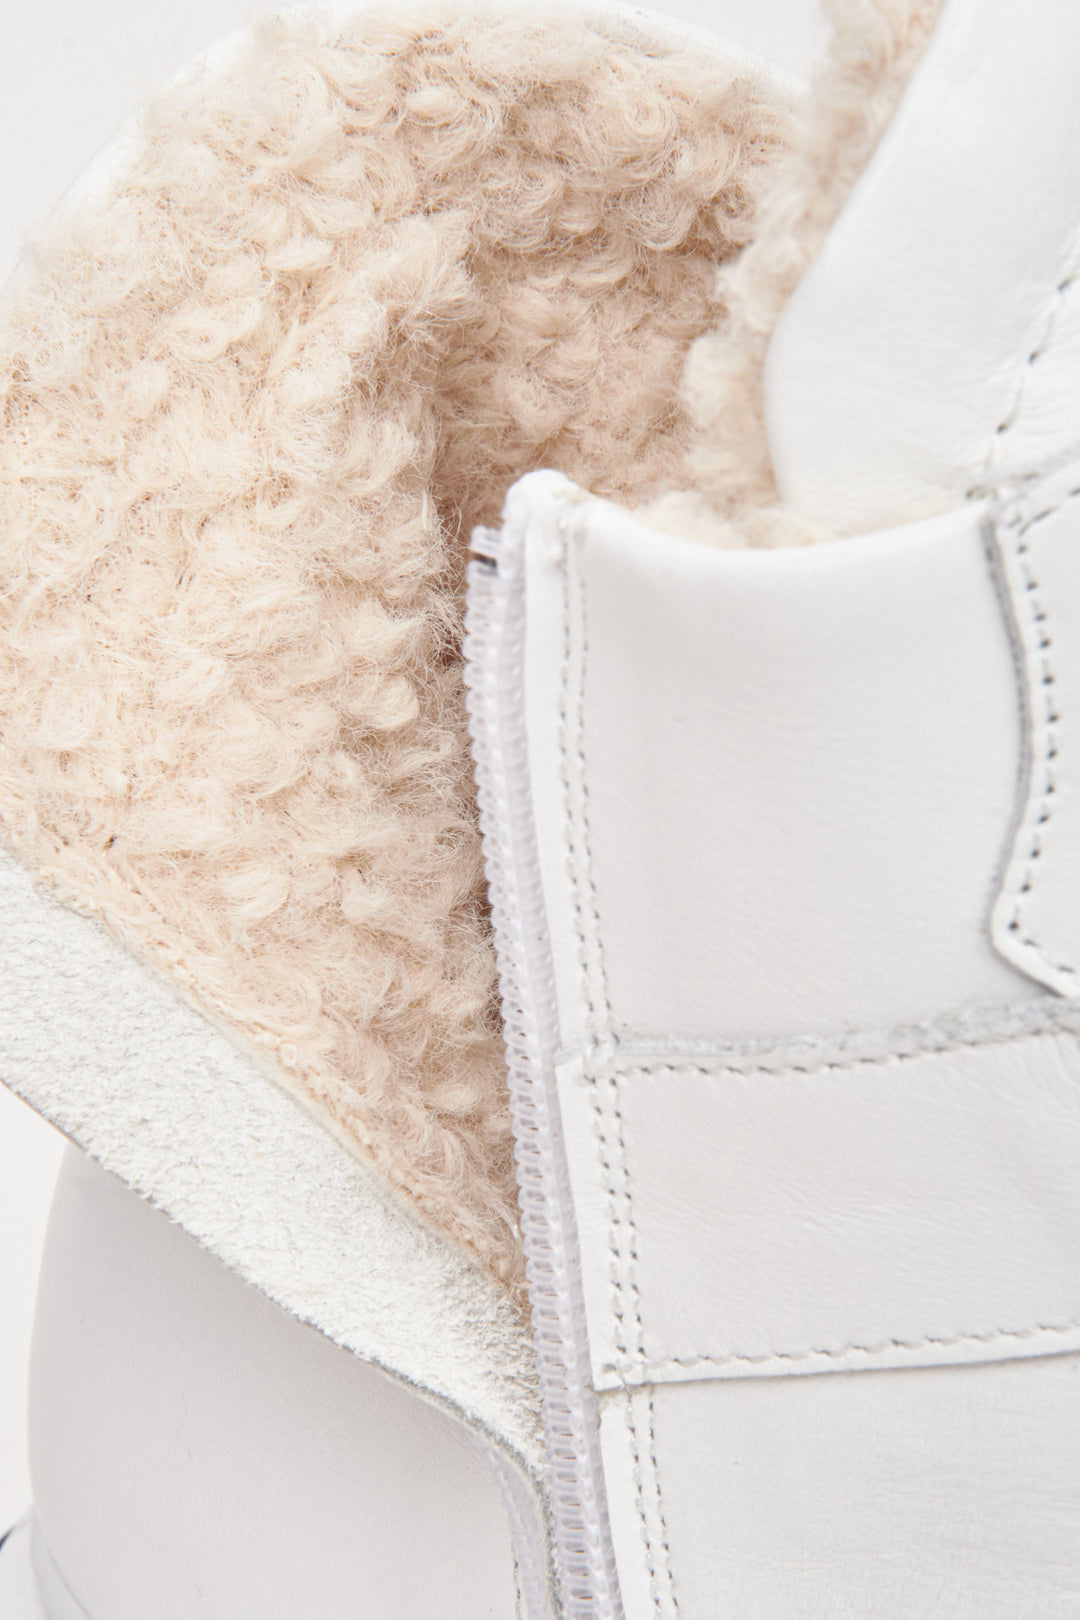 White, leather and suede high-top women's winter sneakers by Estro - close-up on the lacing system.